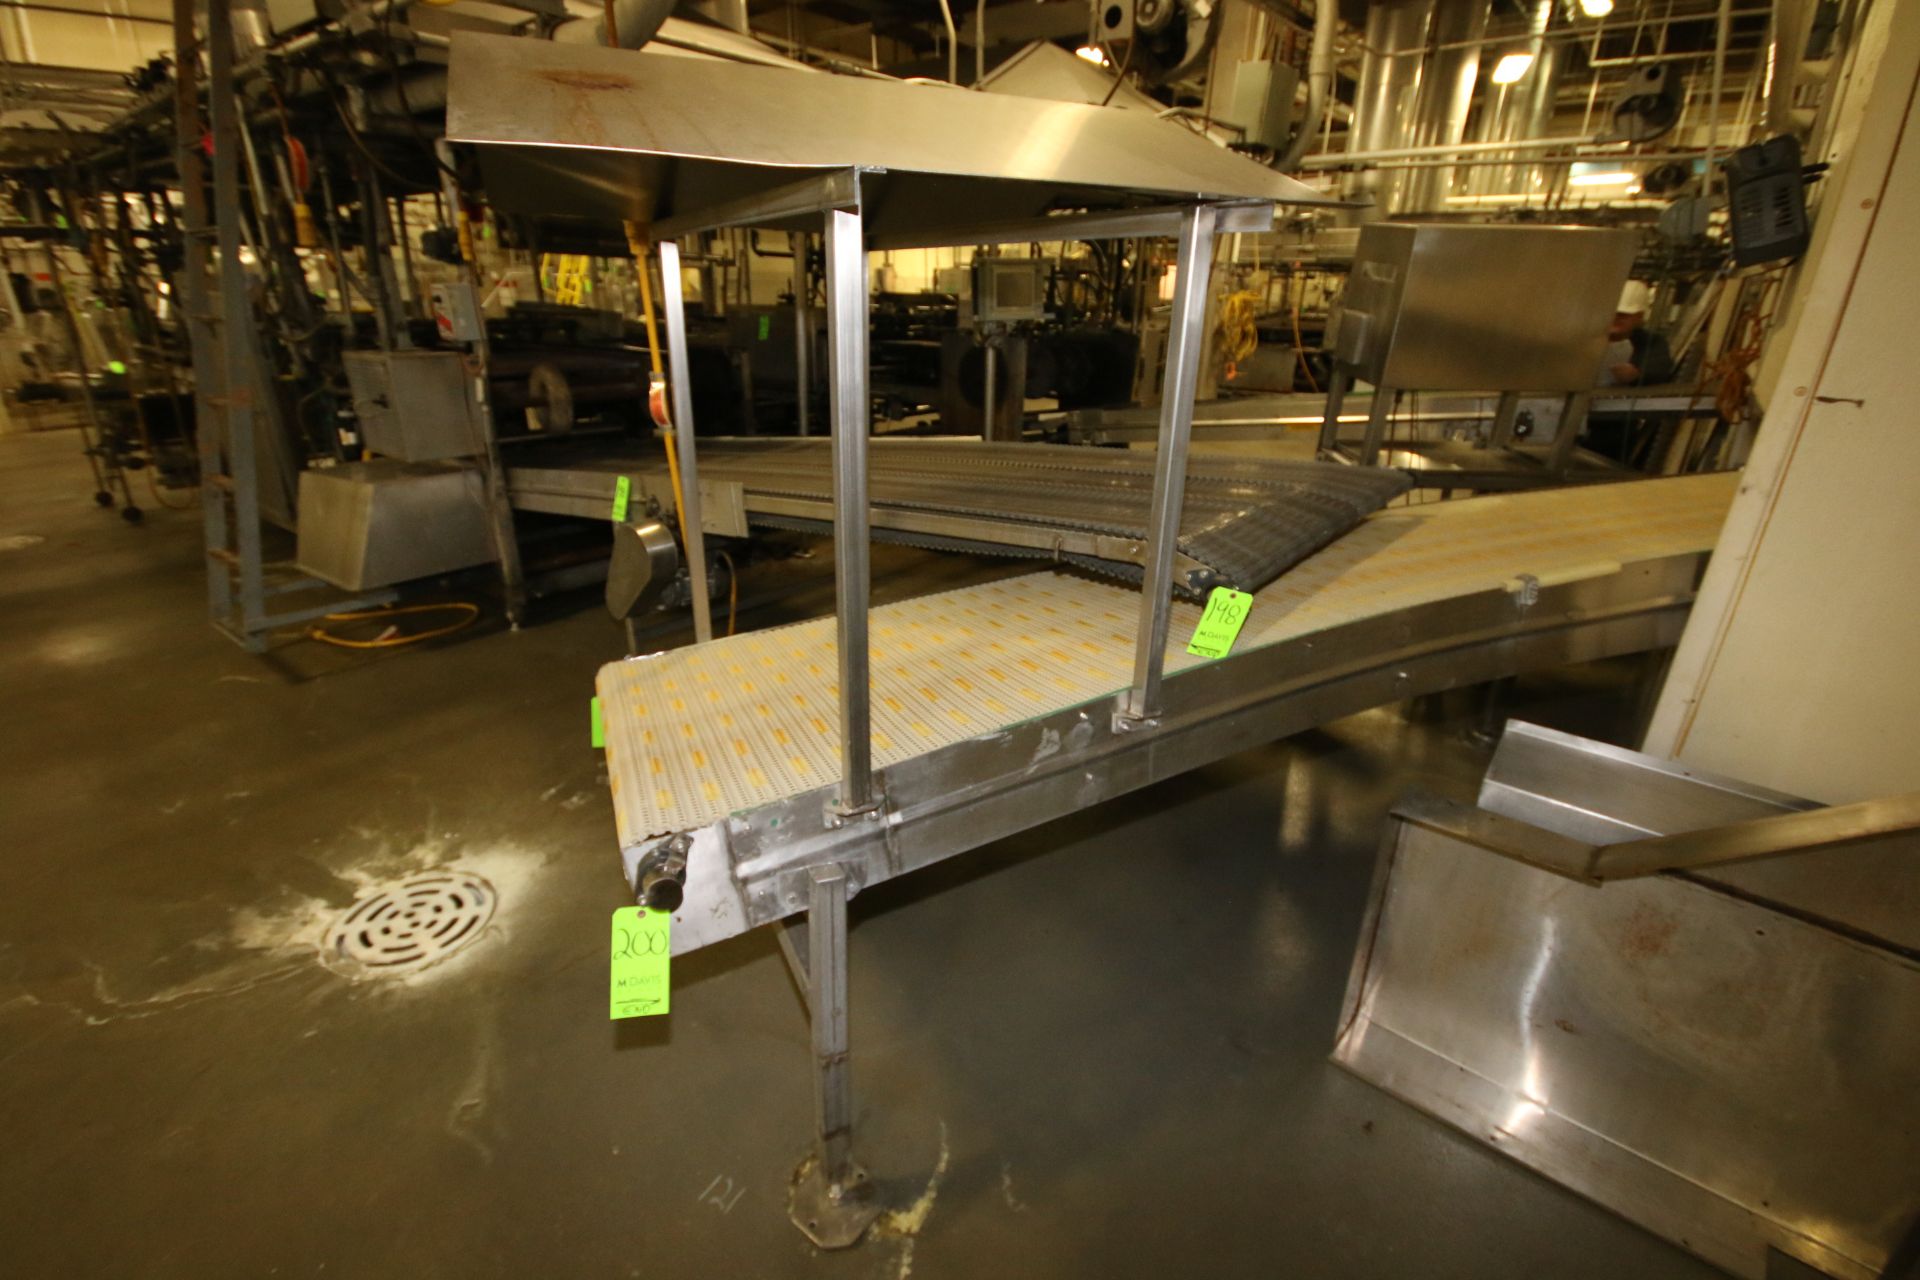 Cook Mfg. 5-Pass Freezer, S/N 09003438 with 80" W S/S Belt, 5" Clearance Deck Spacing, Overall